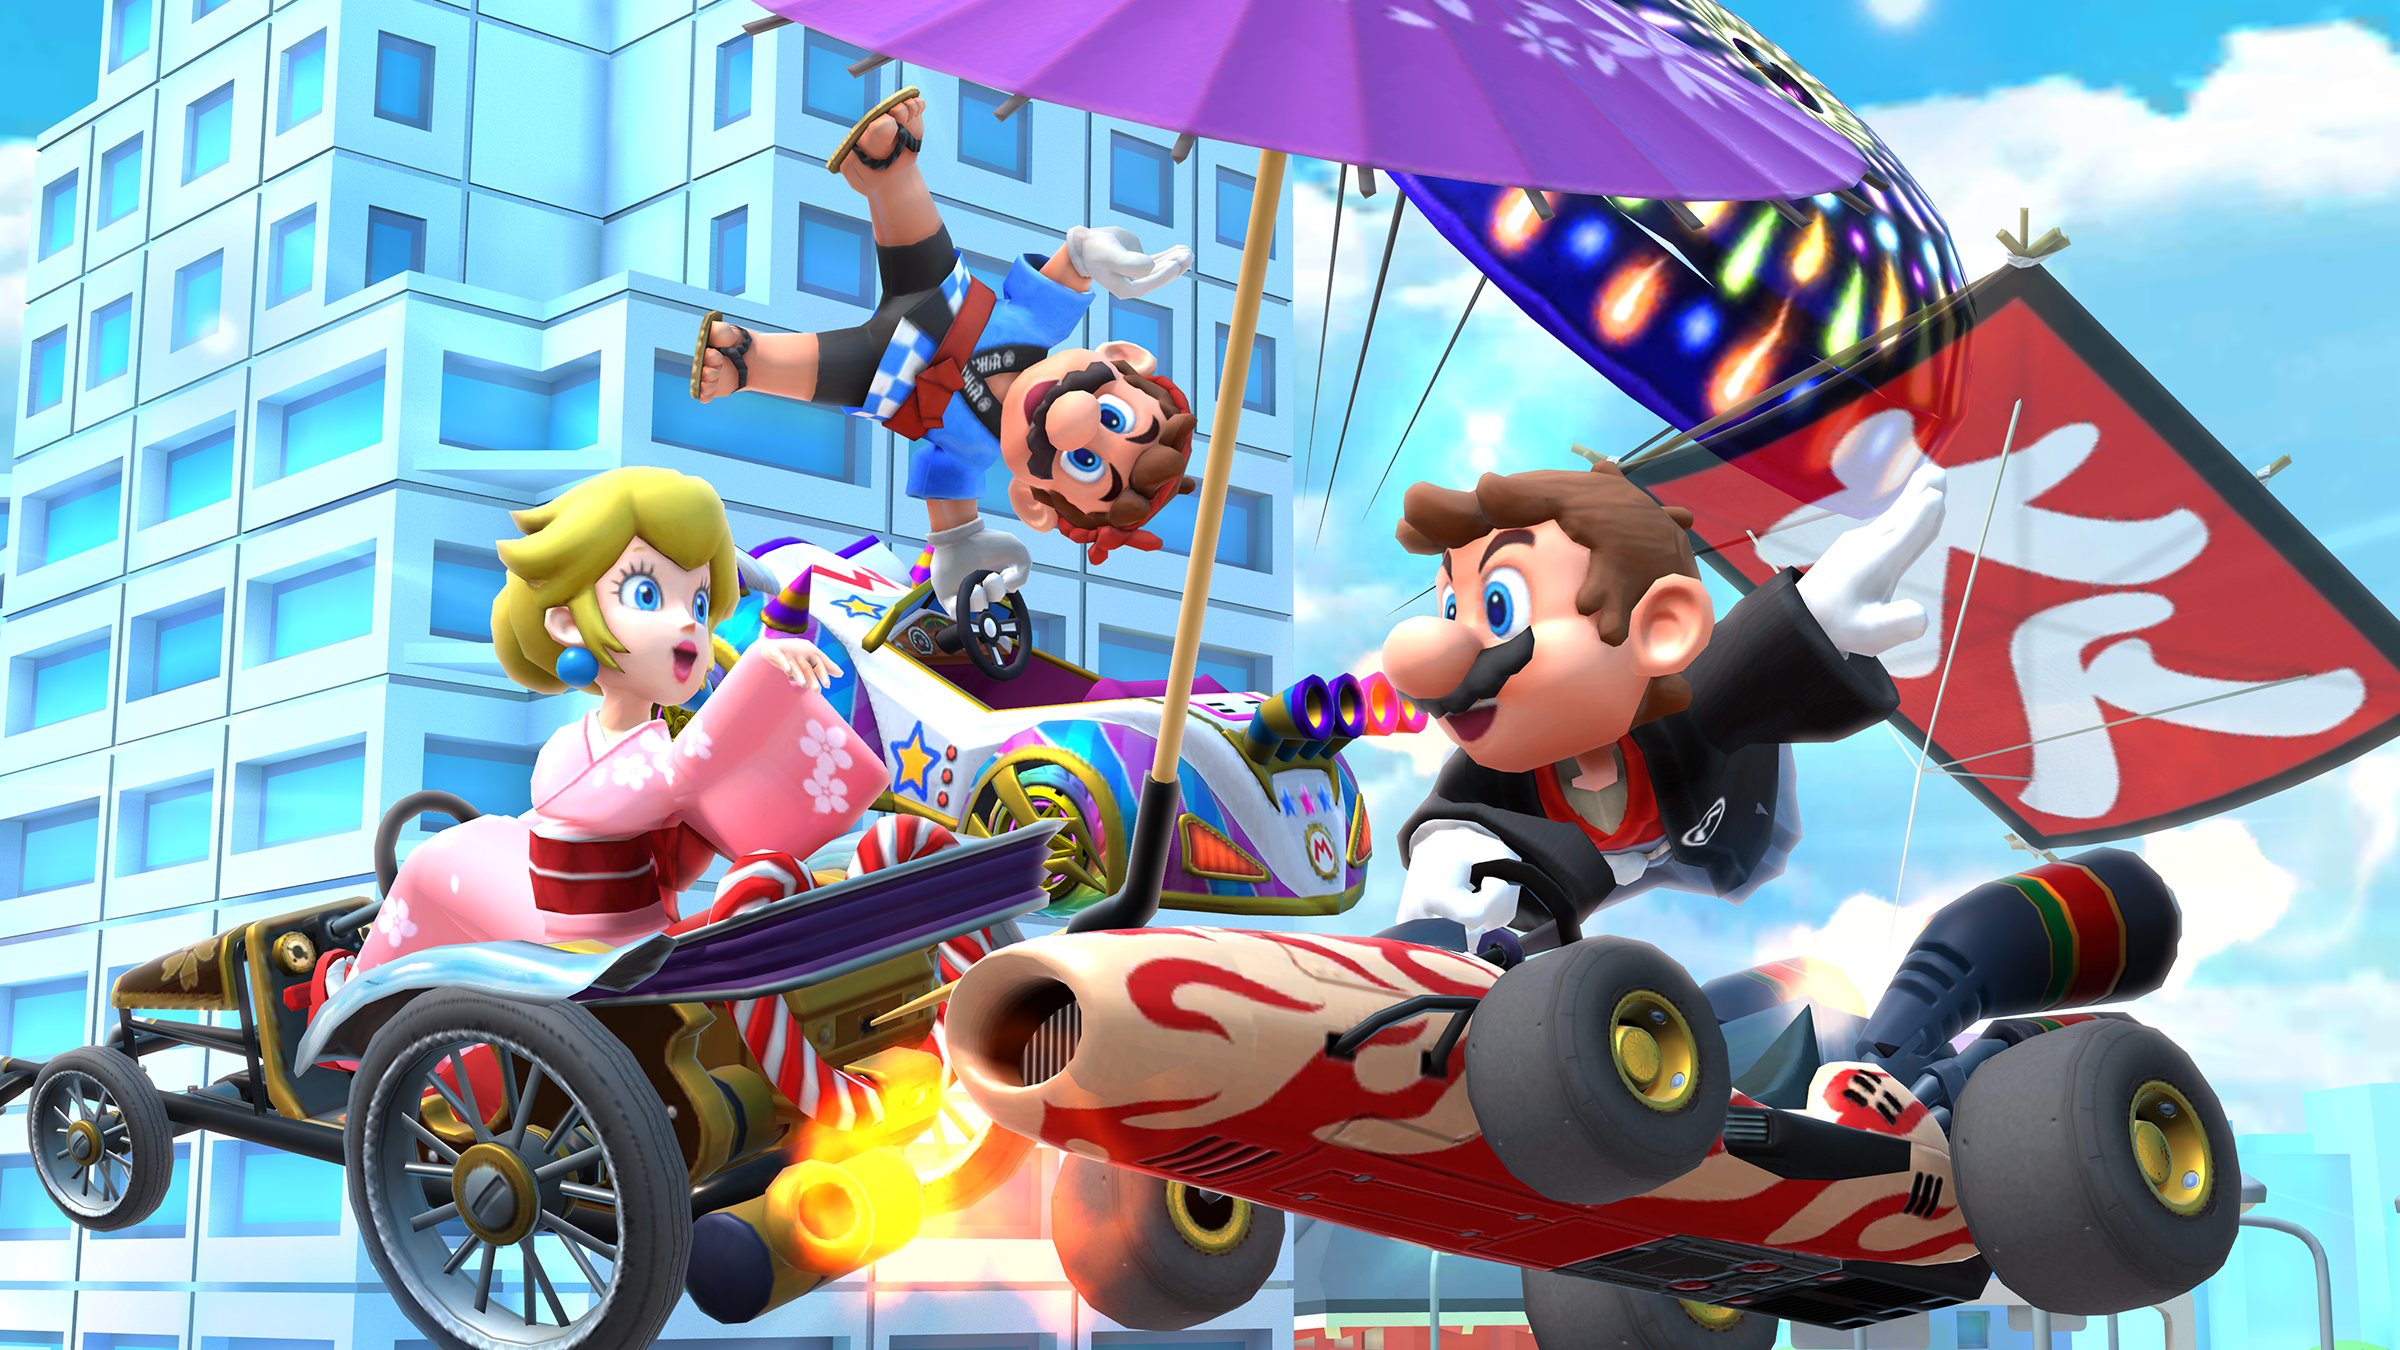 Mario Kart (Tour) News on X: The Summer Festival Tour is almost over. What  was your favorite part of the Summer Festival Tour? #MarioKartTour   / X